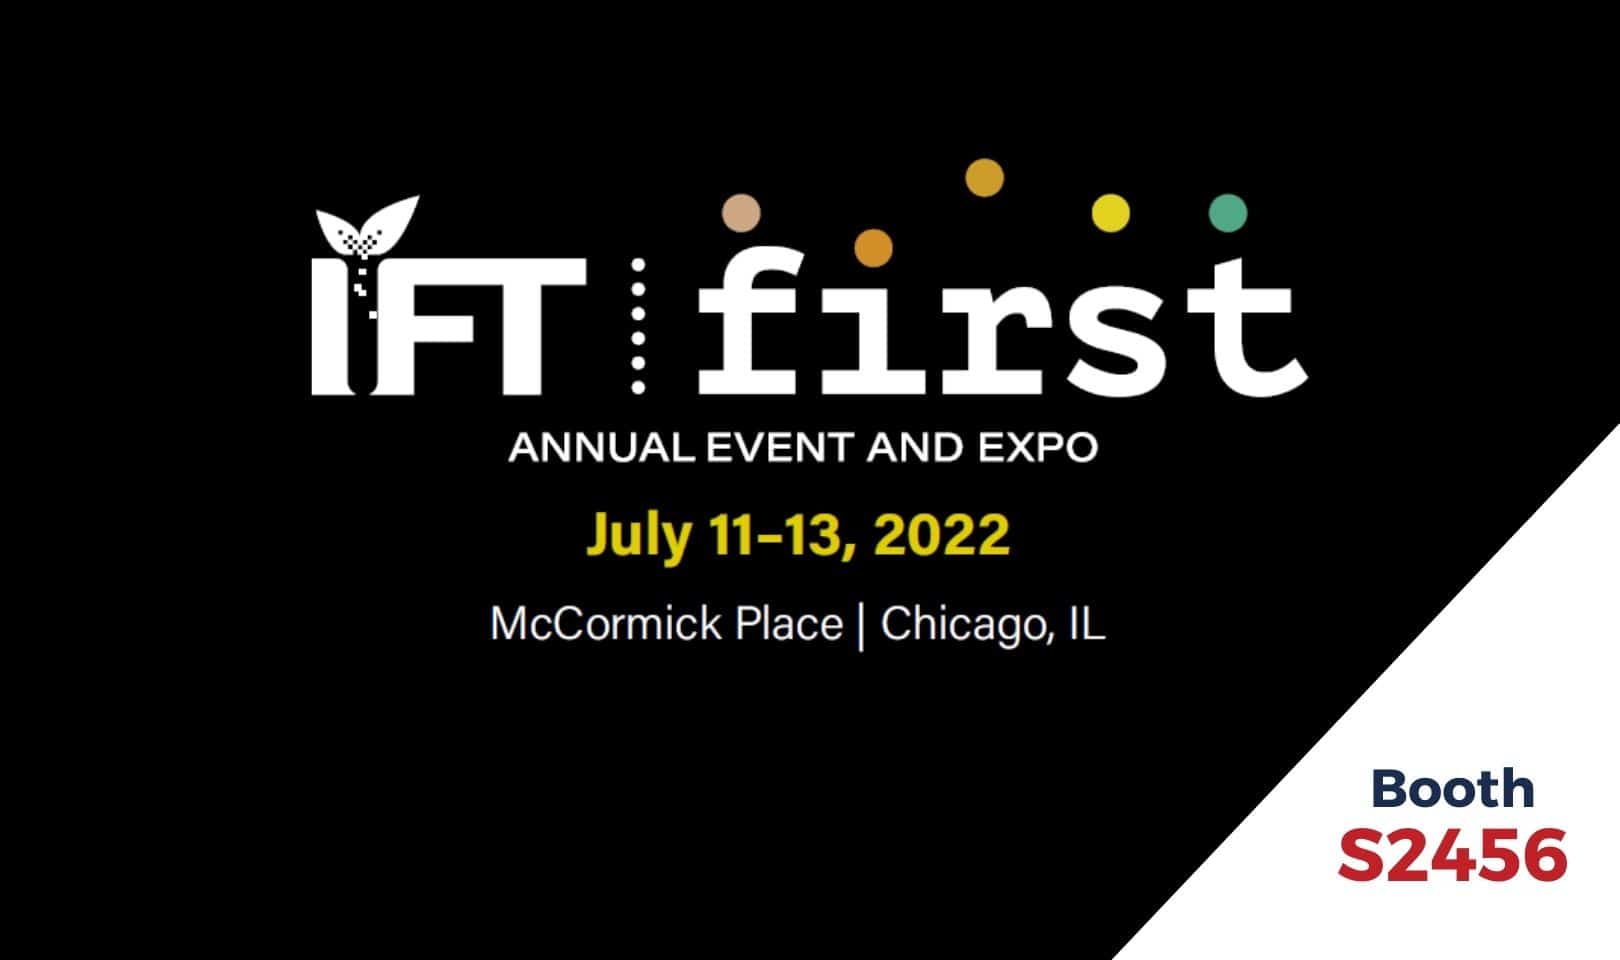 IFT FIRST Annual Event and Expo Austrade Inc.